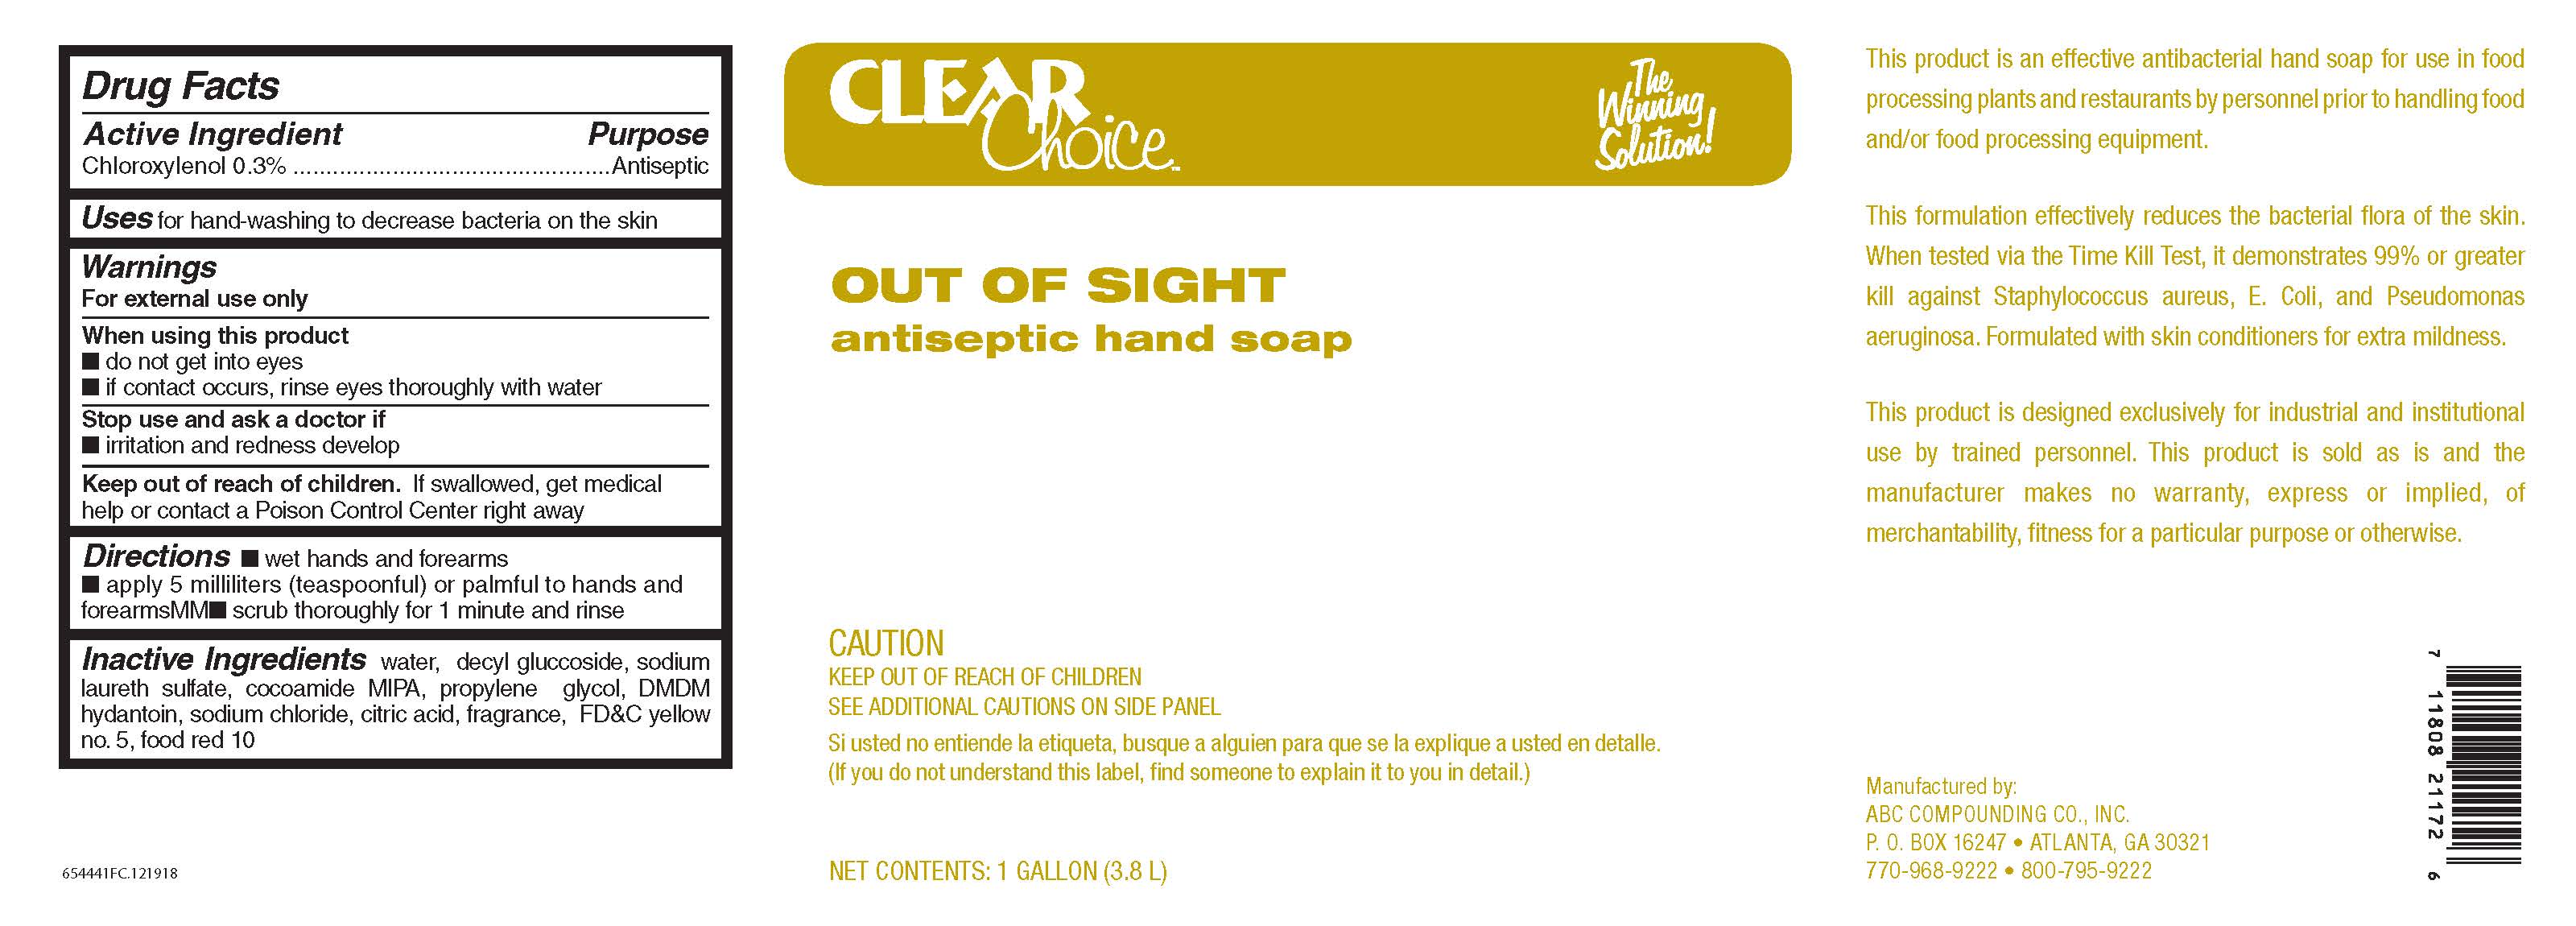 Clear Choice Out Of Sight (Chloroxylenol) Soap [Abc Compounding Co., Inc.]